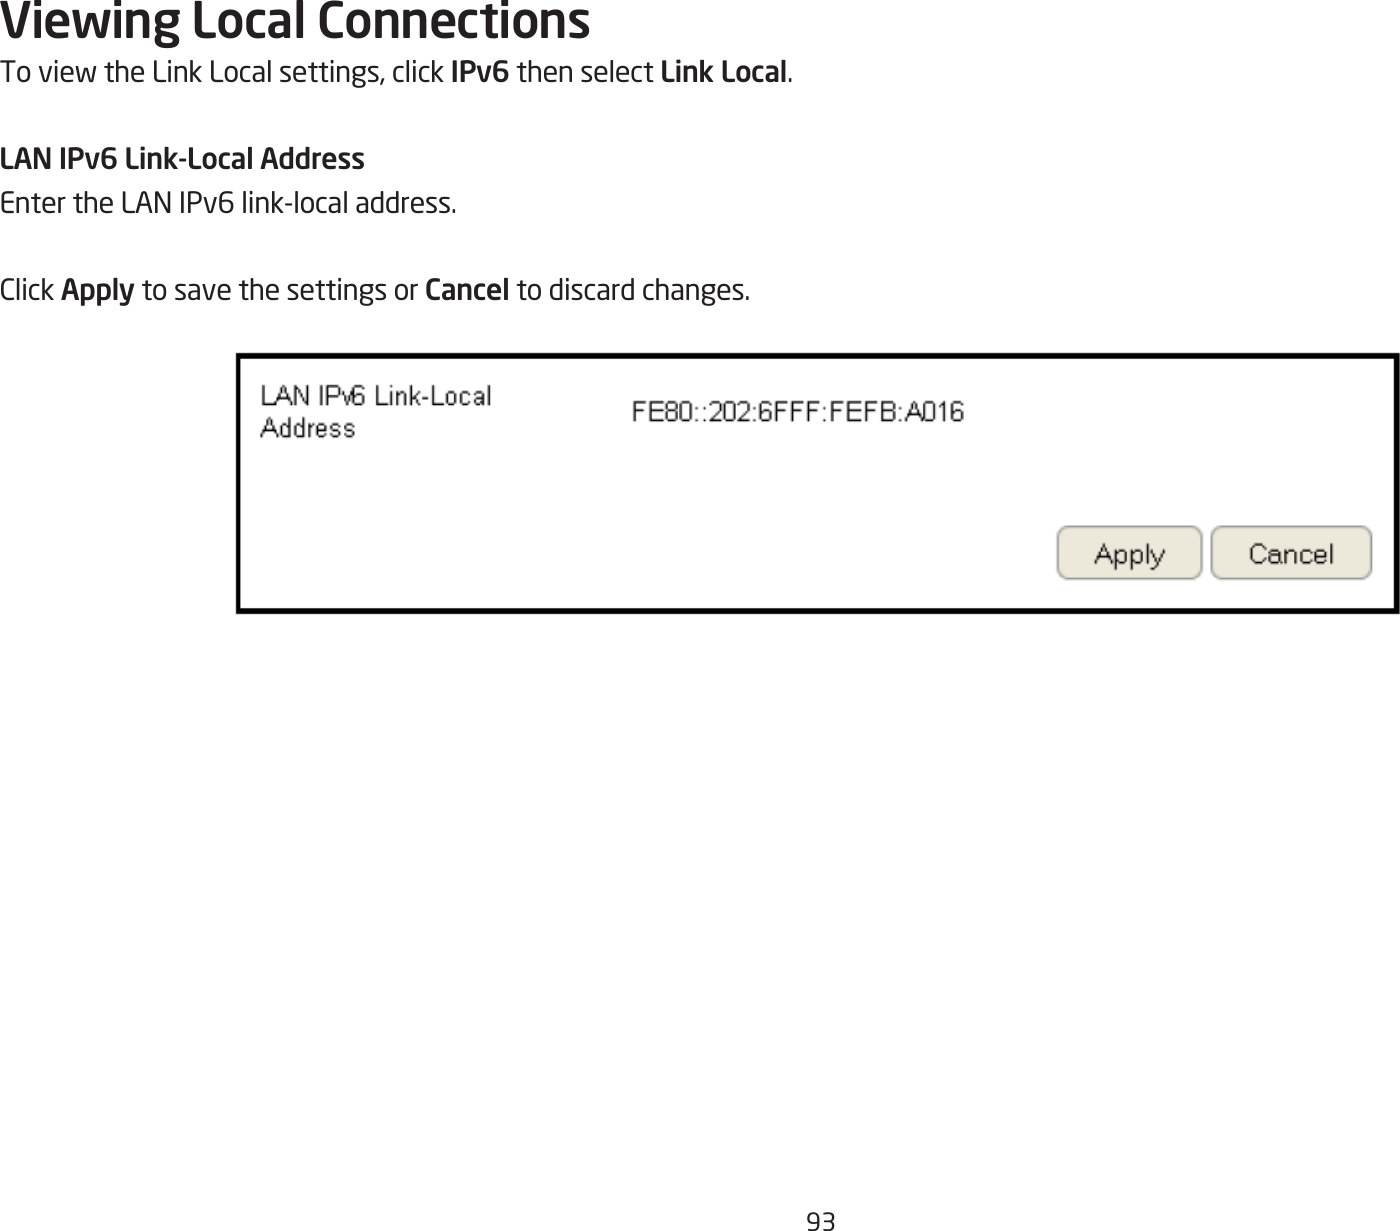 93Viewing Local ConnectionsToviewtheLinkLocalsettings,clickIPv6 then select Link Local.LAN IPv6 Link-Local AddressEntertheLANIPv6link-localaddress.ClickApply to save the settings or Cancel to discard changes.